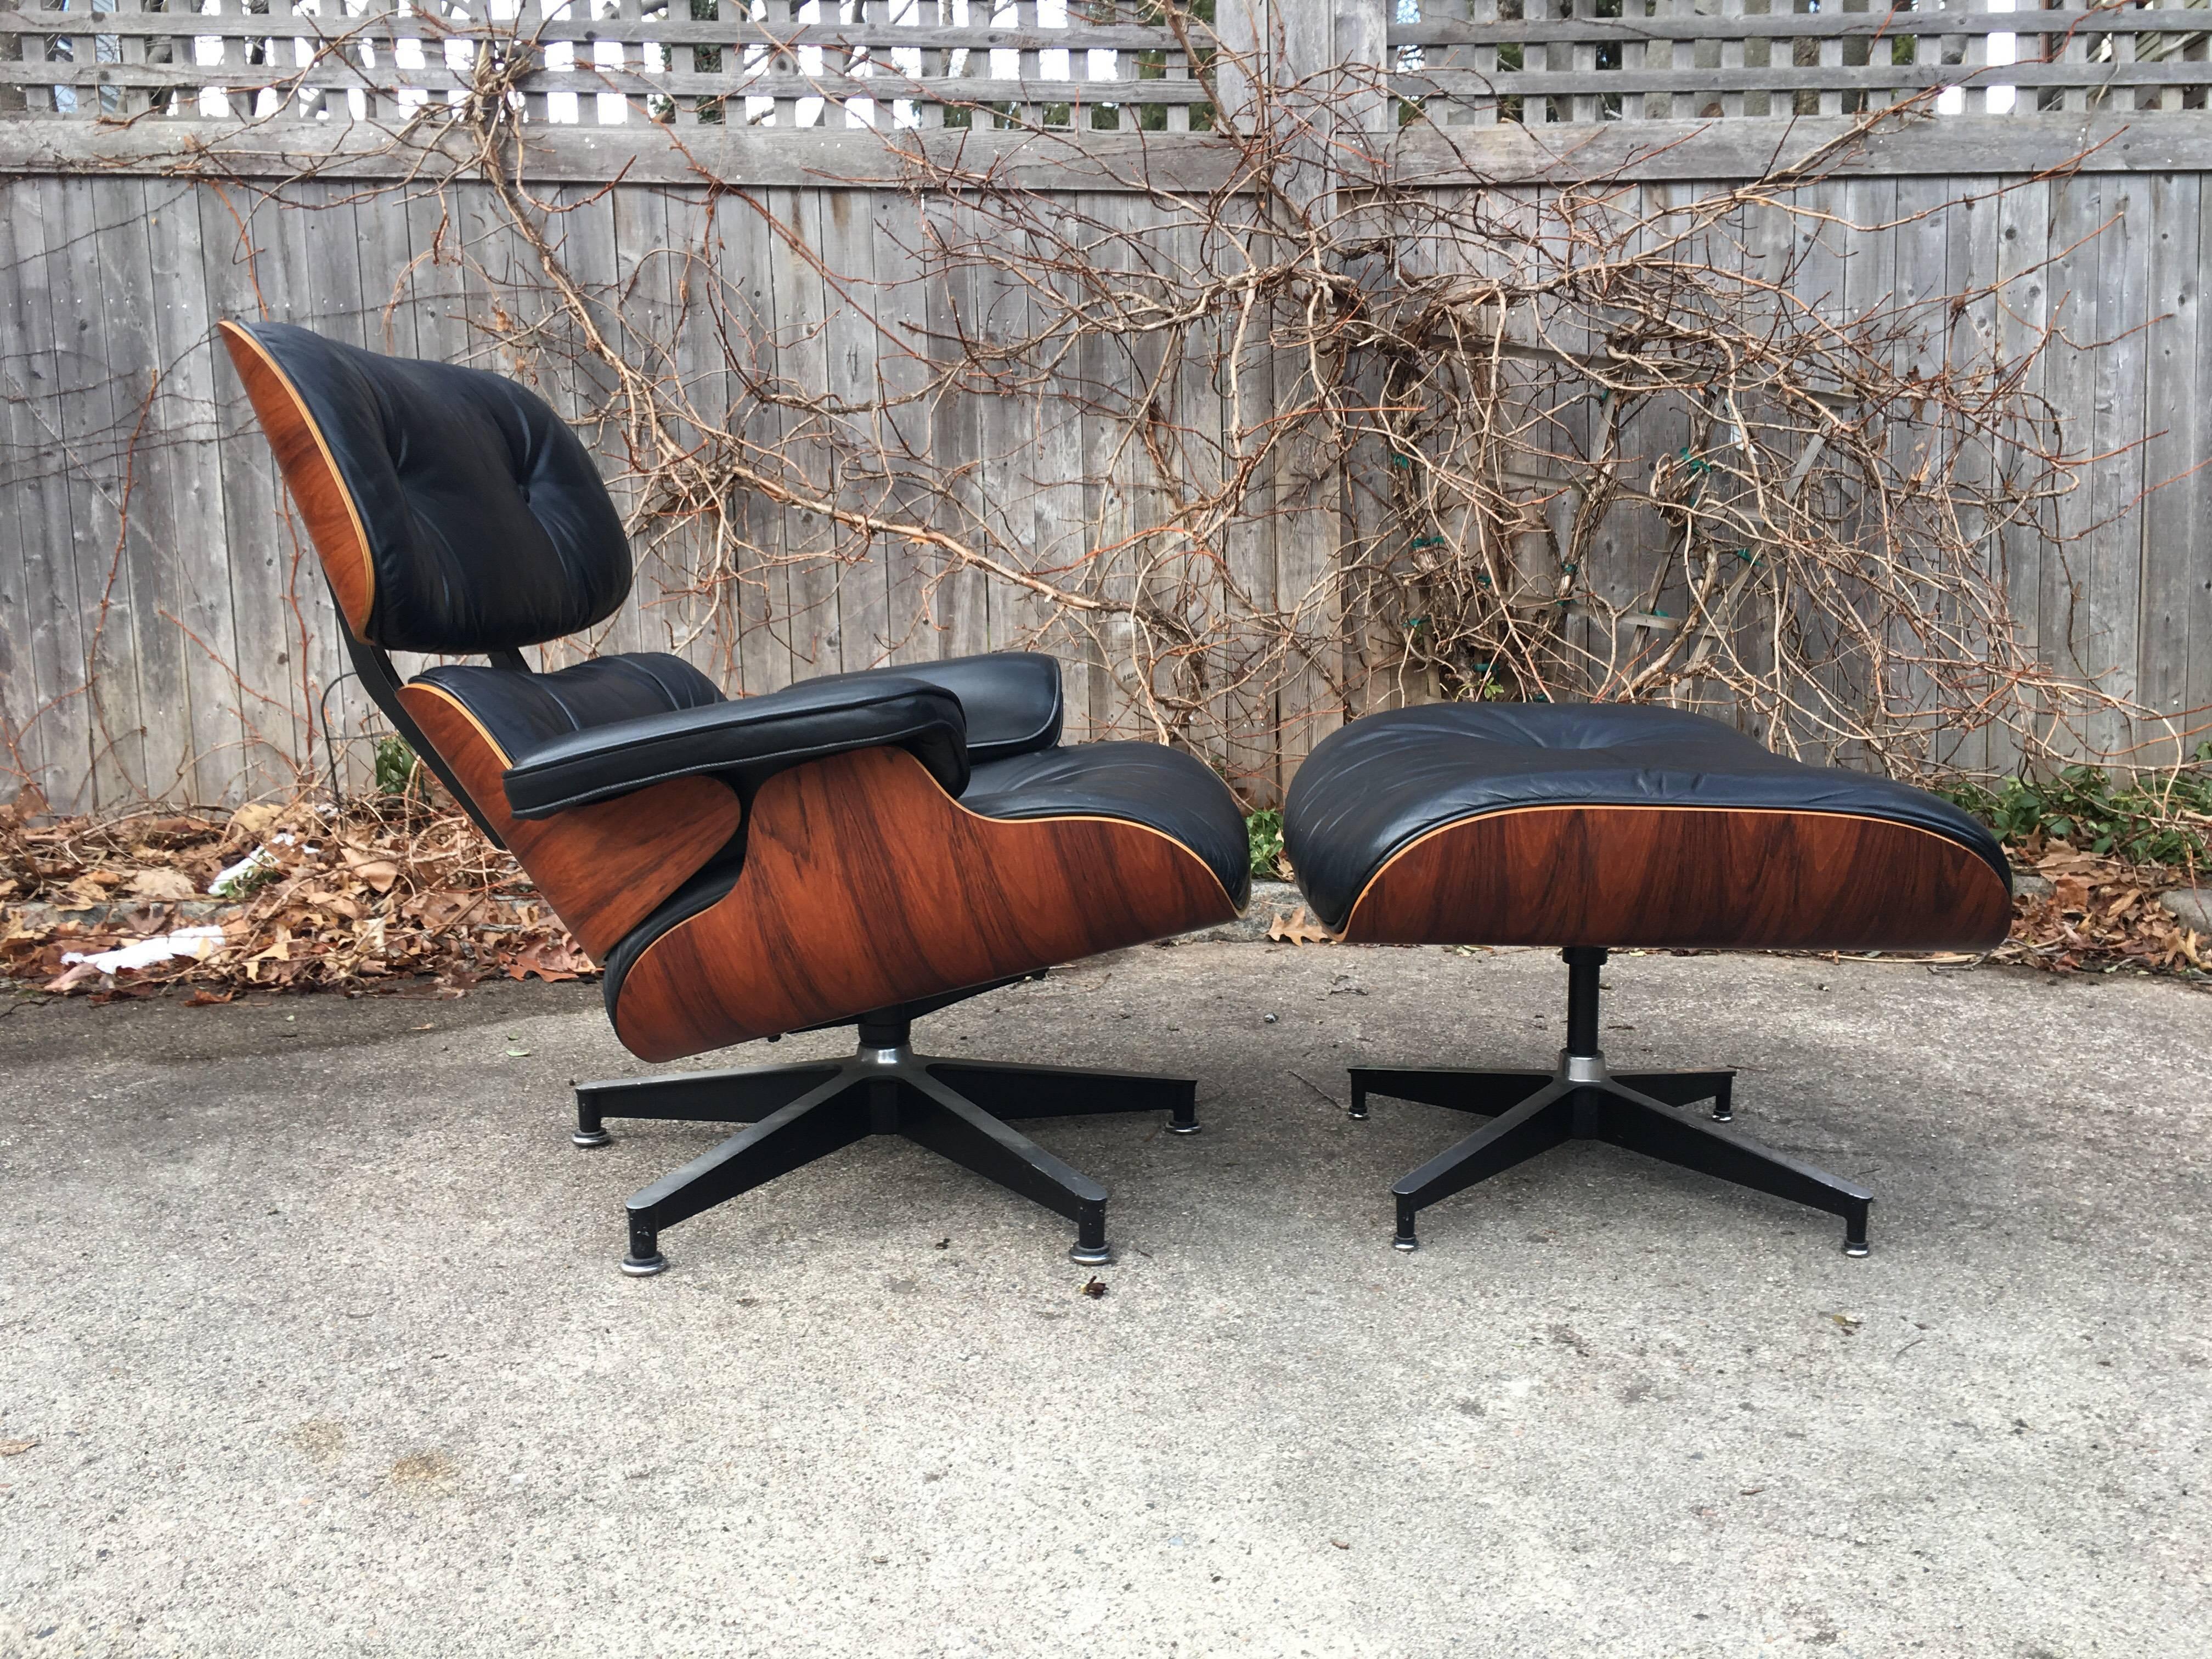 Perfect 1970s Herman Miller Eames lounge chair and ottoman in rosewood. Spectacular rosewood grains and color. All original.